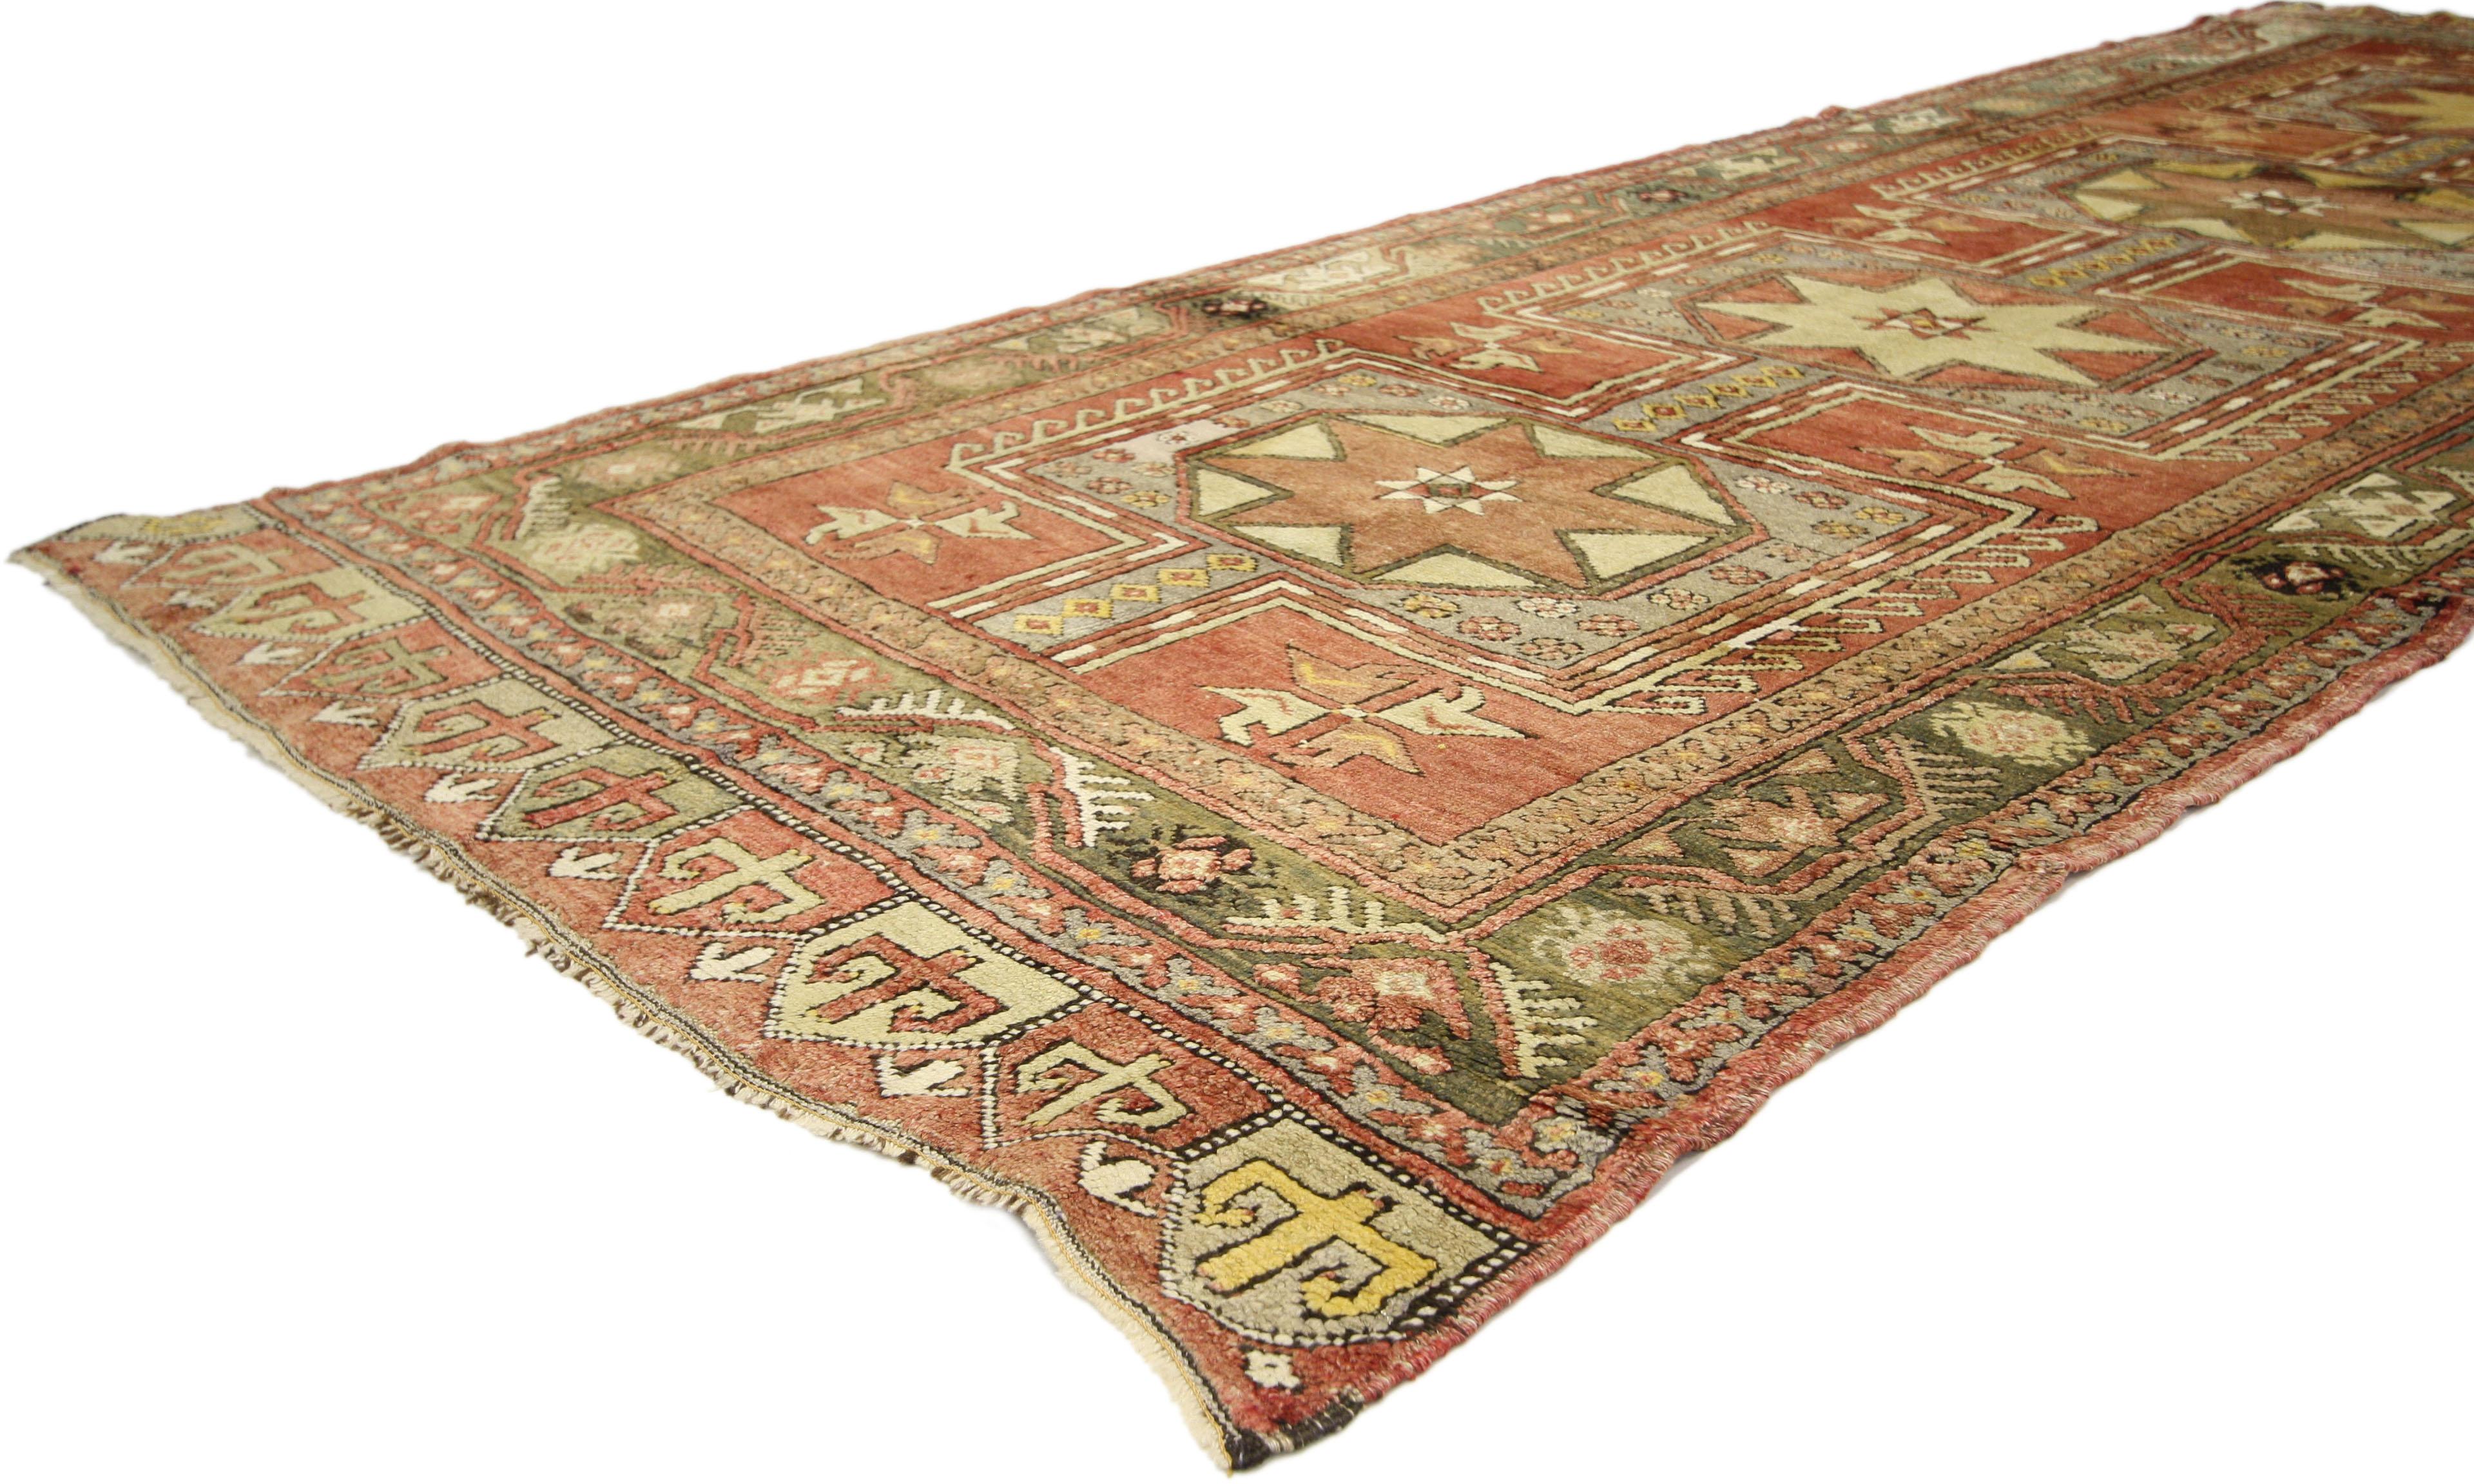 73875 Vintage Turkish Oushak Gallery Rug, Wide Hallway Runner. This vintage Turkish Oushak carpet runner with modern tribal style communicates some of the finer and more important points of traditional Turkish design elements. Features a stacked row